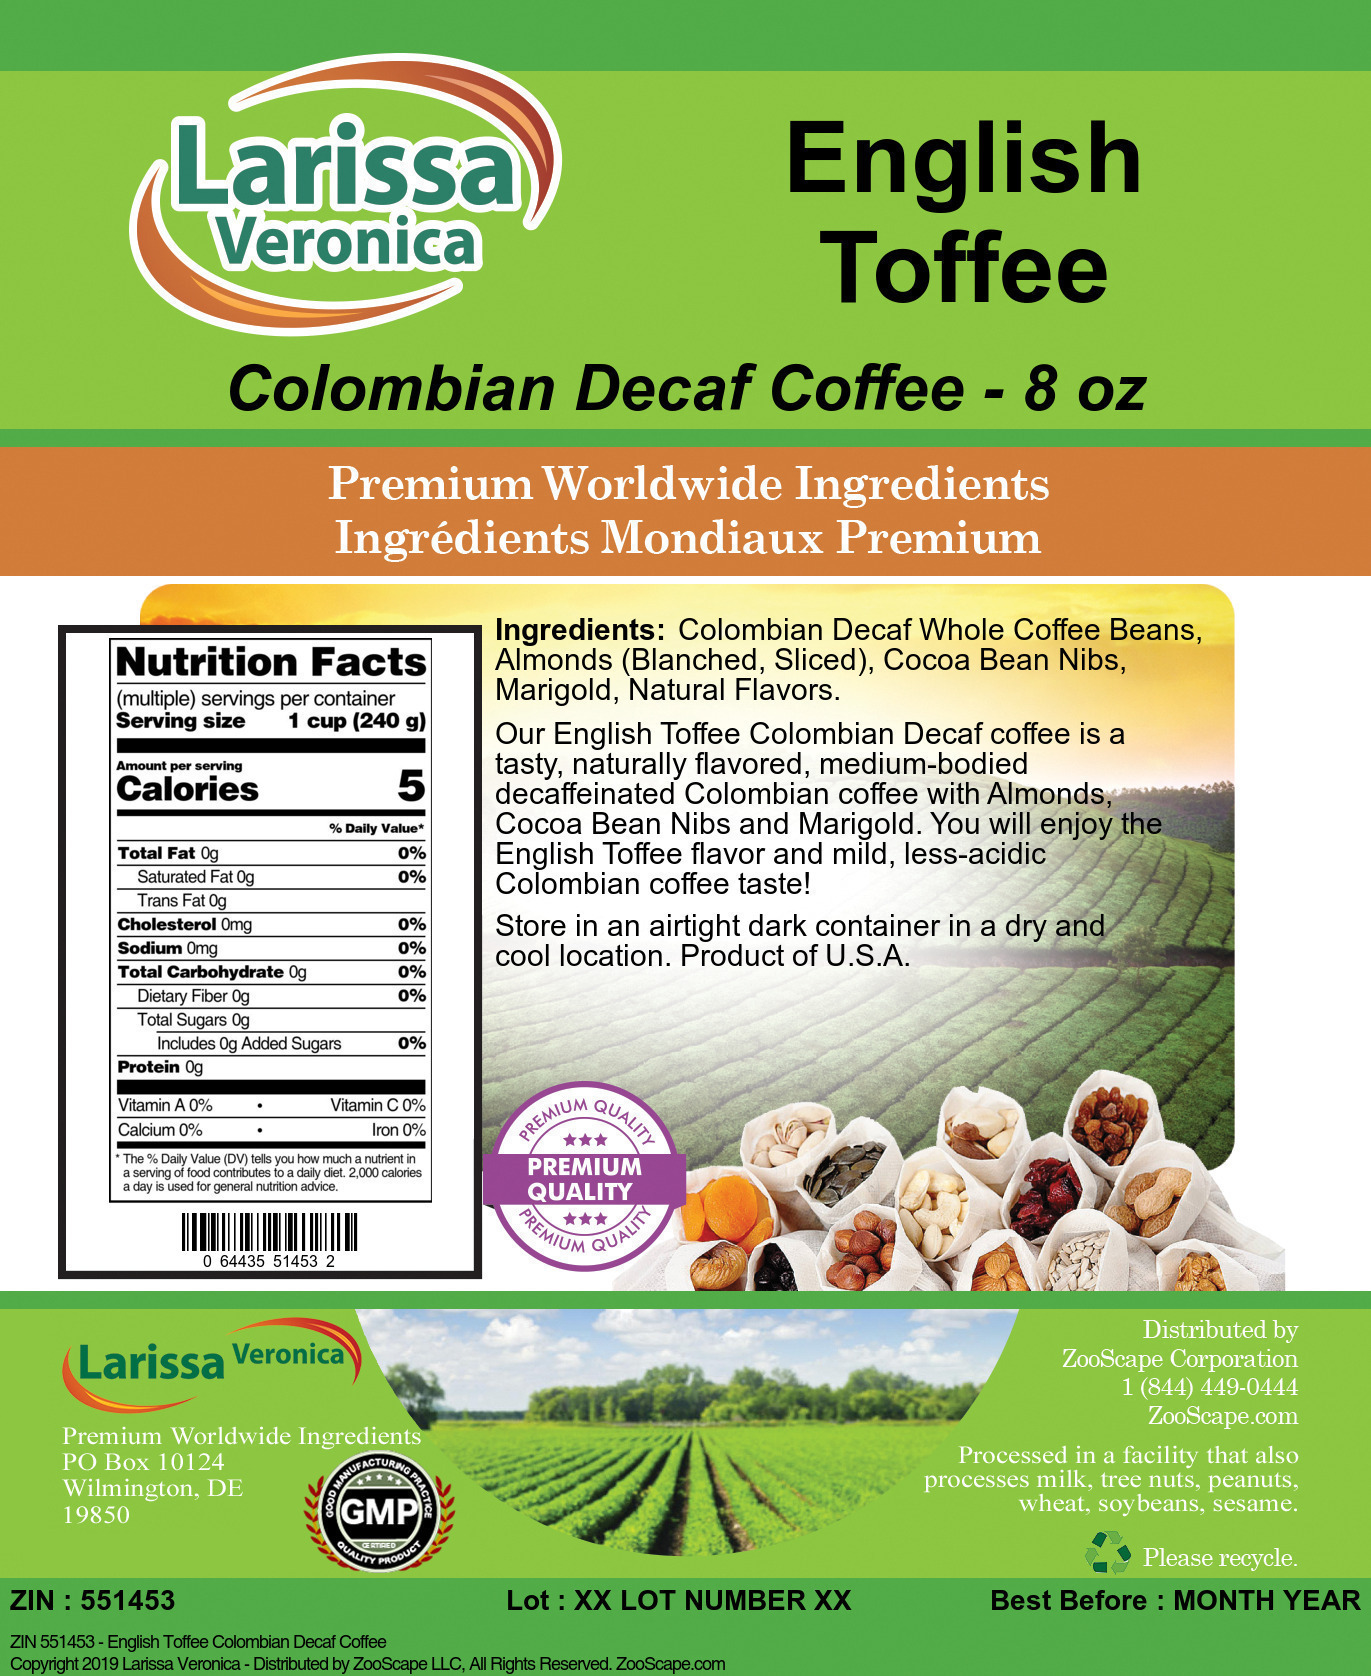 English Toffee Colombian Decaf Coffee - Label